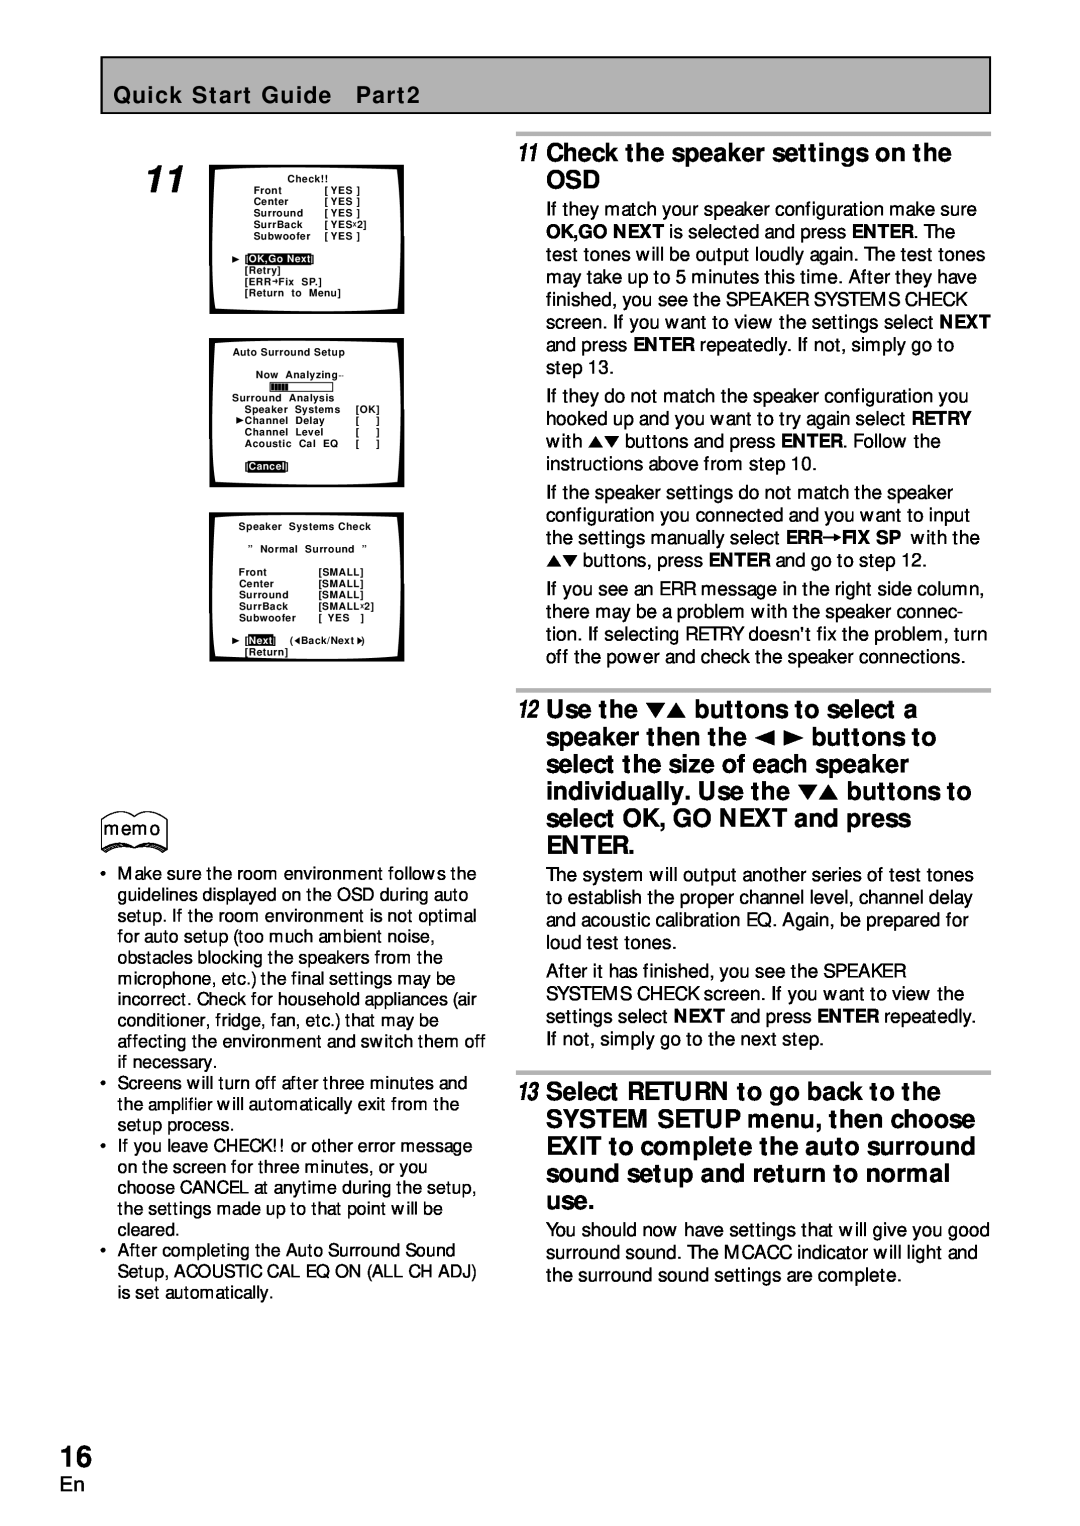 Pioneer VSA-AX10 operating instructions Check the speaker settings on the OSD, Enter 